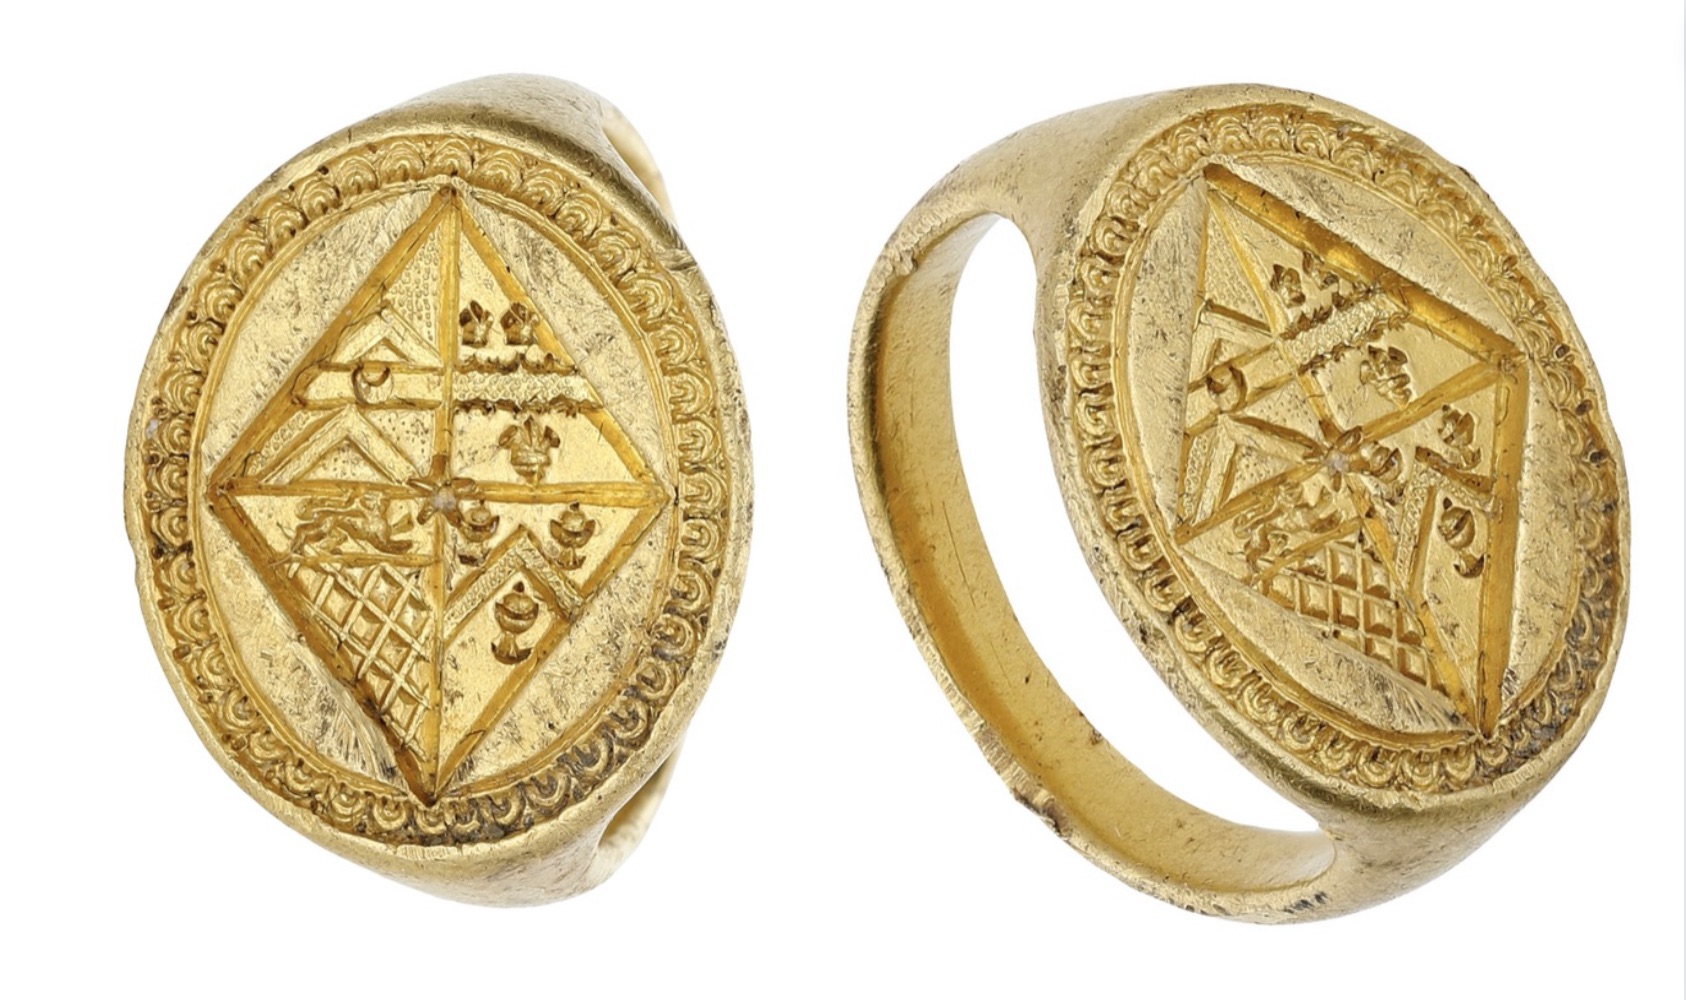 17th-century gold ring in London saleroom – Antique Collecting